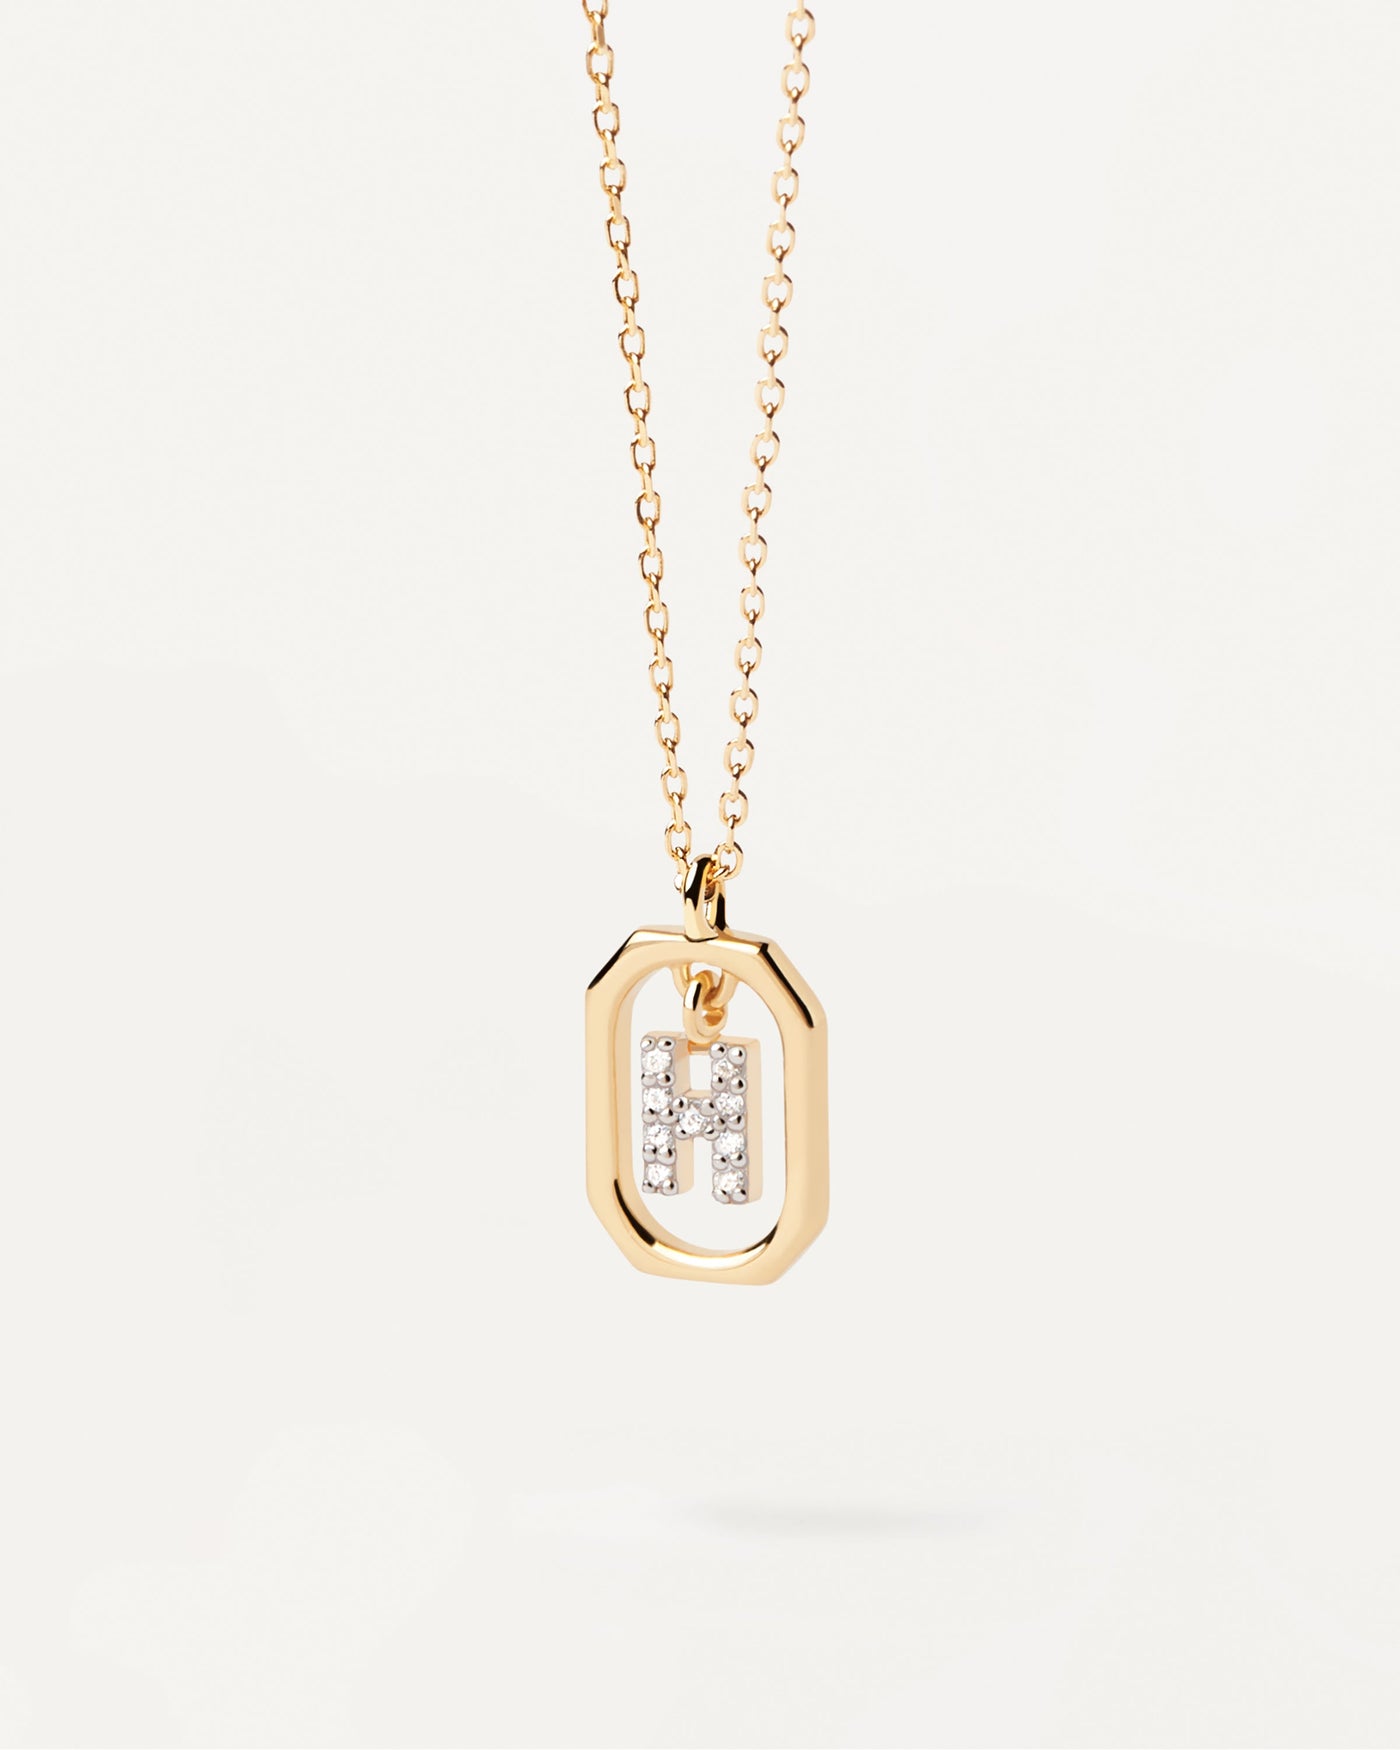 2023 Selection | Mini Letter H Necklace. Small initial H necklace in zirconia inside gold-plated silver octagonal pendant. Get the latest arrival from PDPAOLA. Place your order safely and get this Best Seller. Free Shipping.